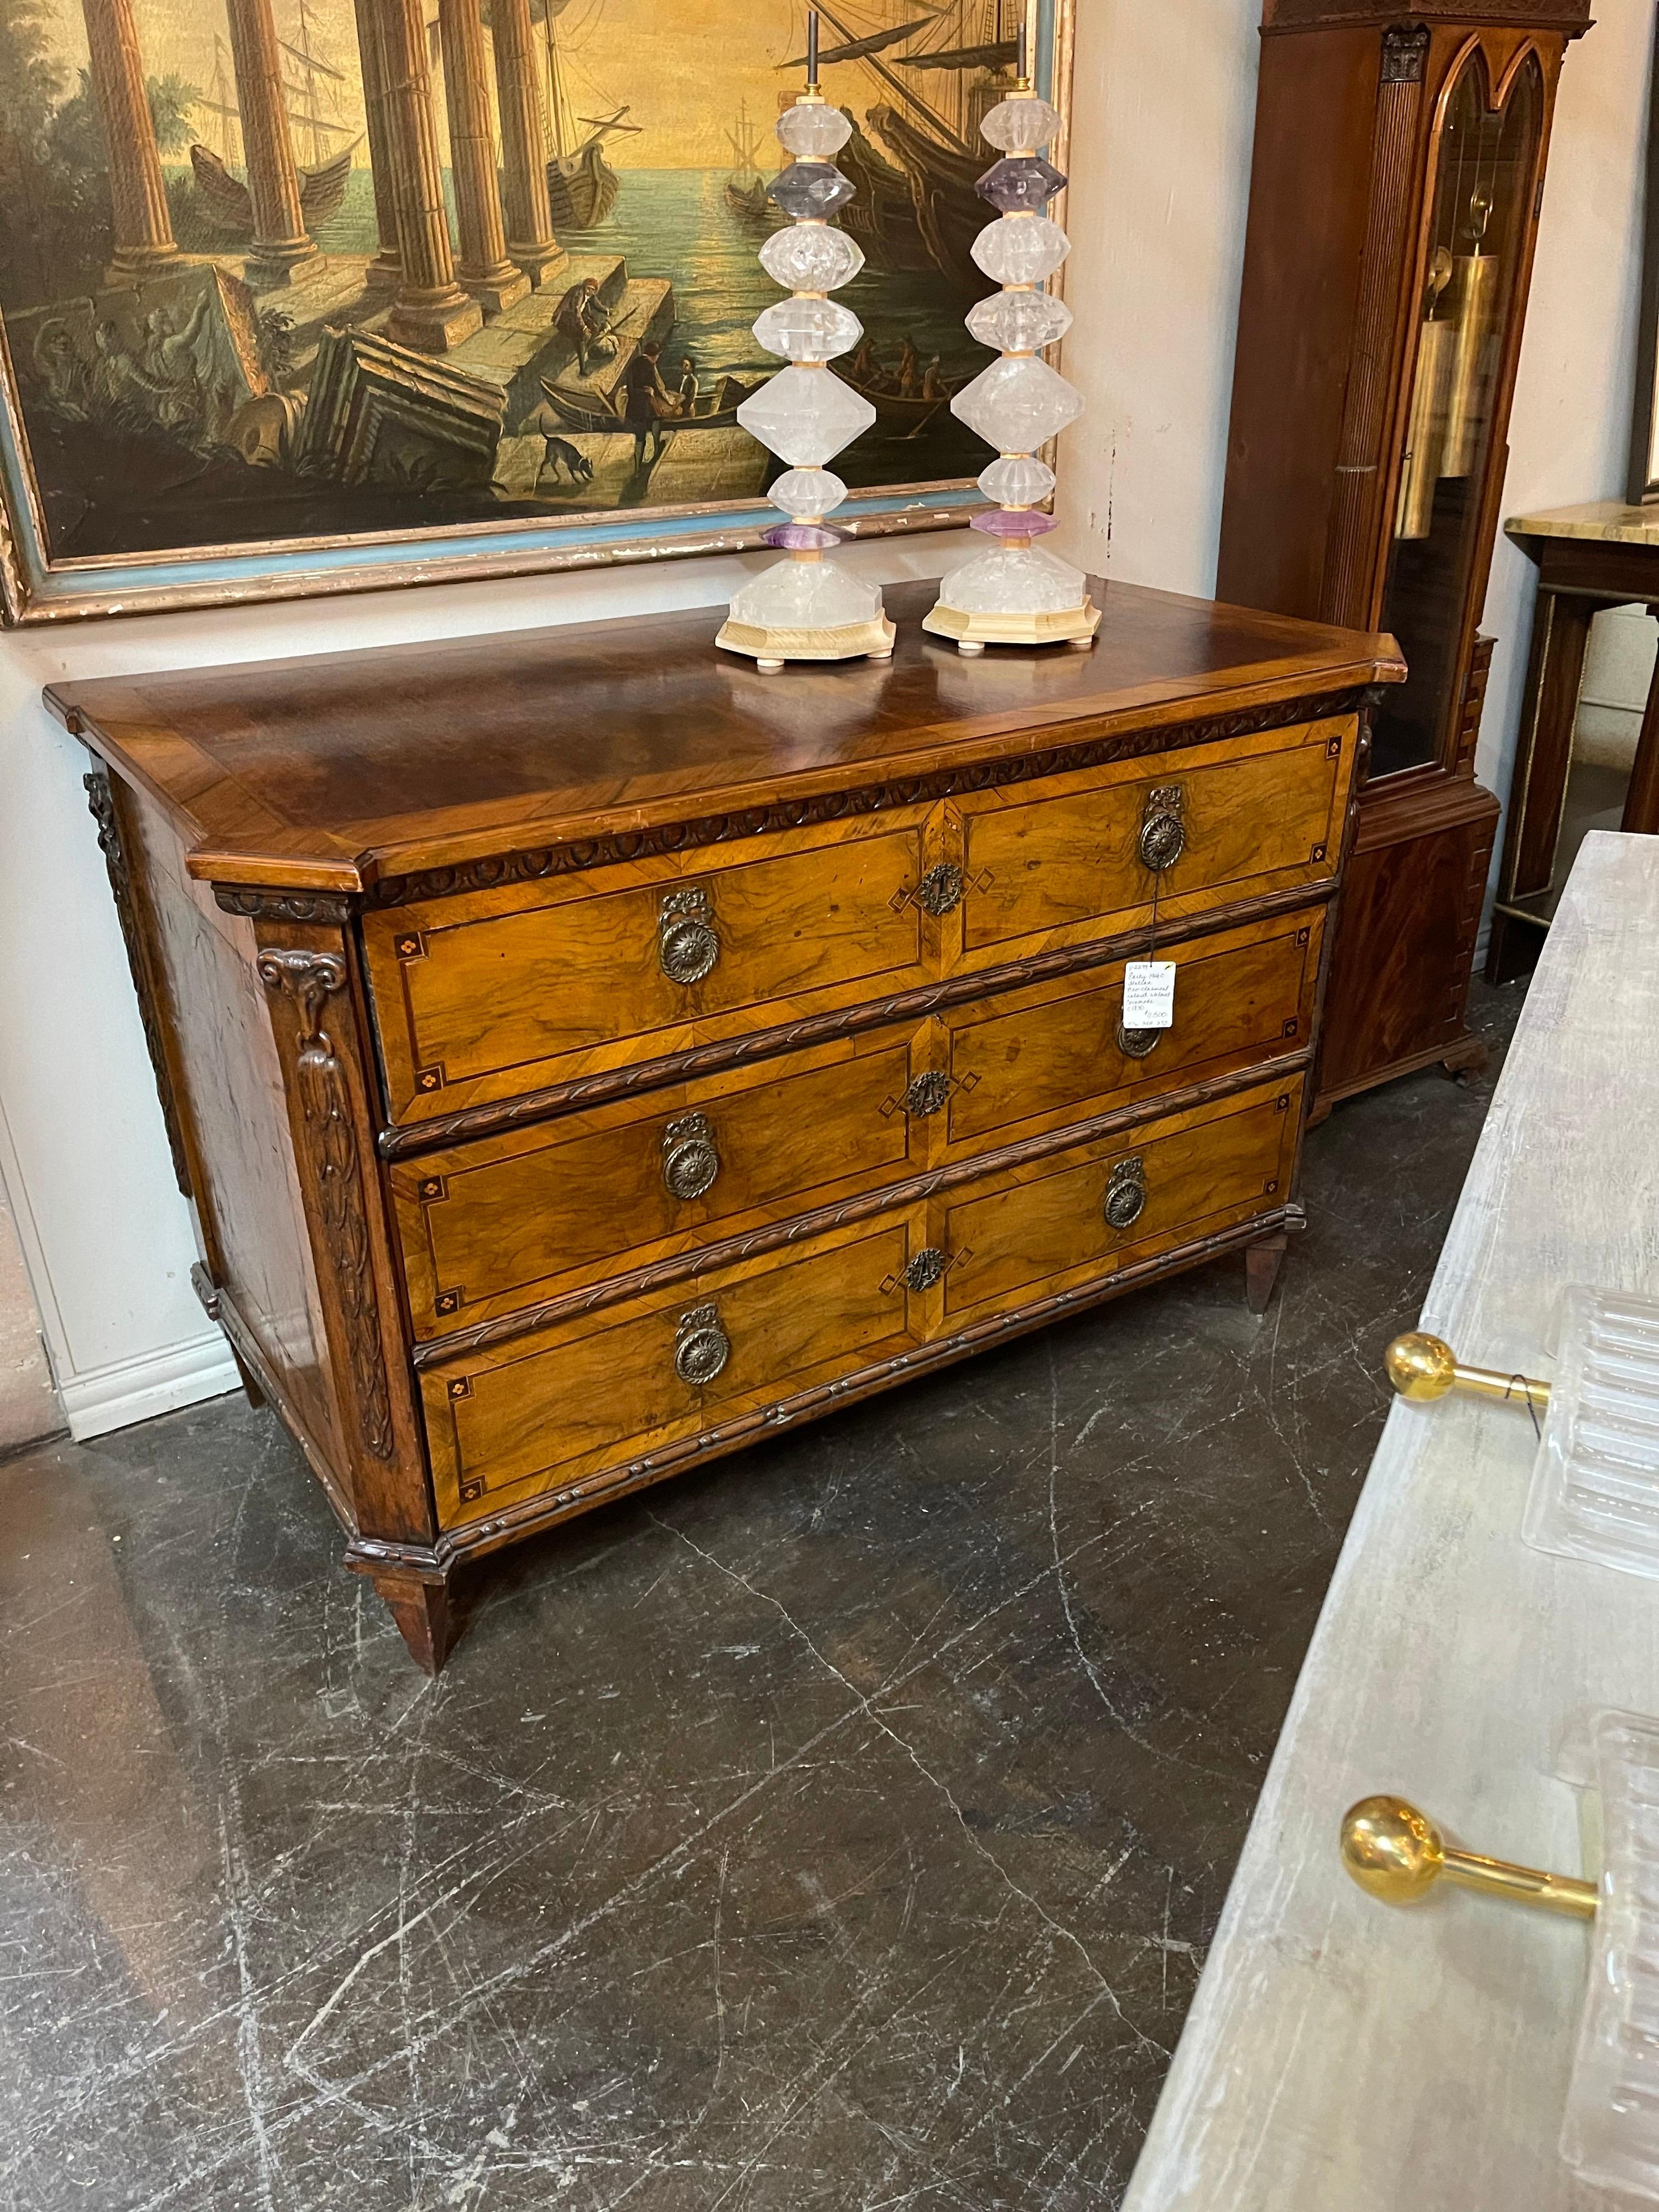 Superb quality early 19th century Italian neoclassical mahogany commode. The three long drawers having old bronze escutcheons and pulls flanked by canted corners with nicely detailed relief carvings. The entire on delicately tapered